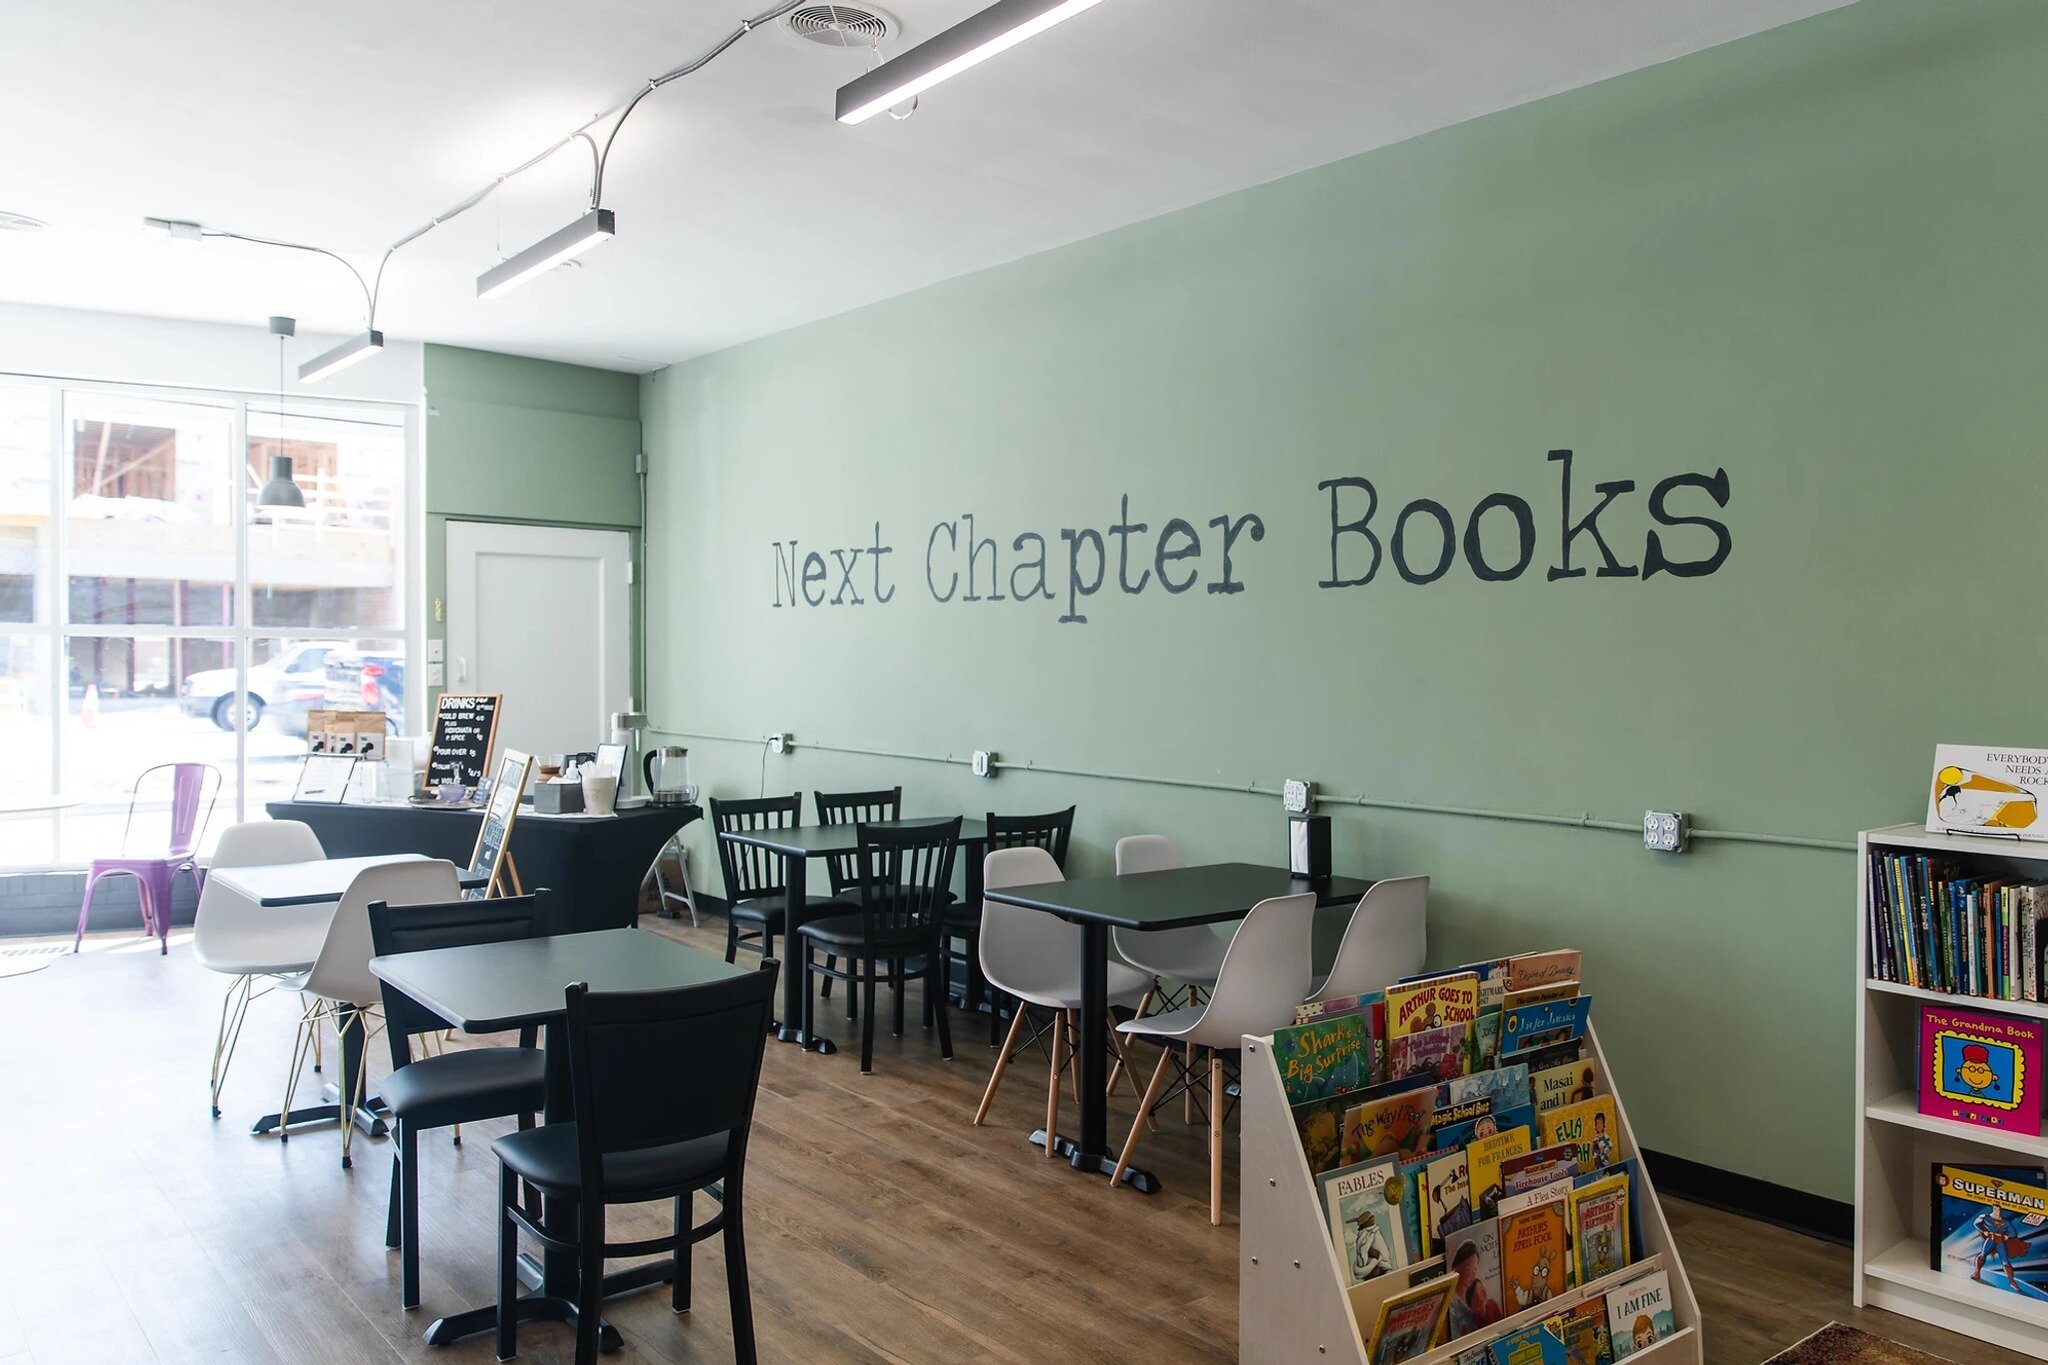 In 2018, the dream of creating a space for sharing favorite stories, both true and imagined, and fostering connections among book lovers began to take shape for Jay &amp; Sarah Williams of @nextchapterbooksdetroit, a family-owned-and-operated, commun